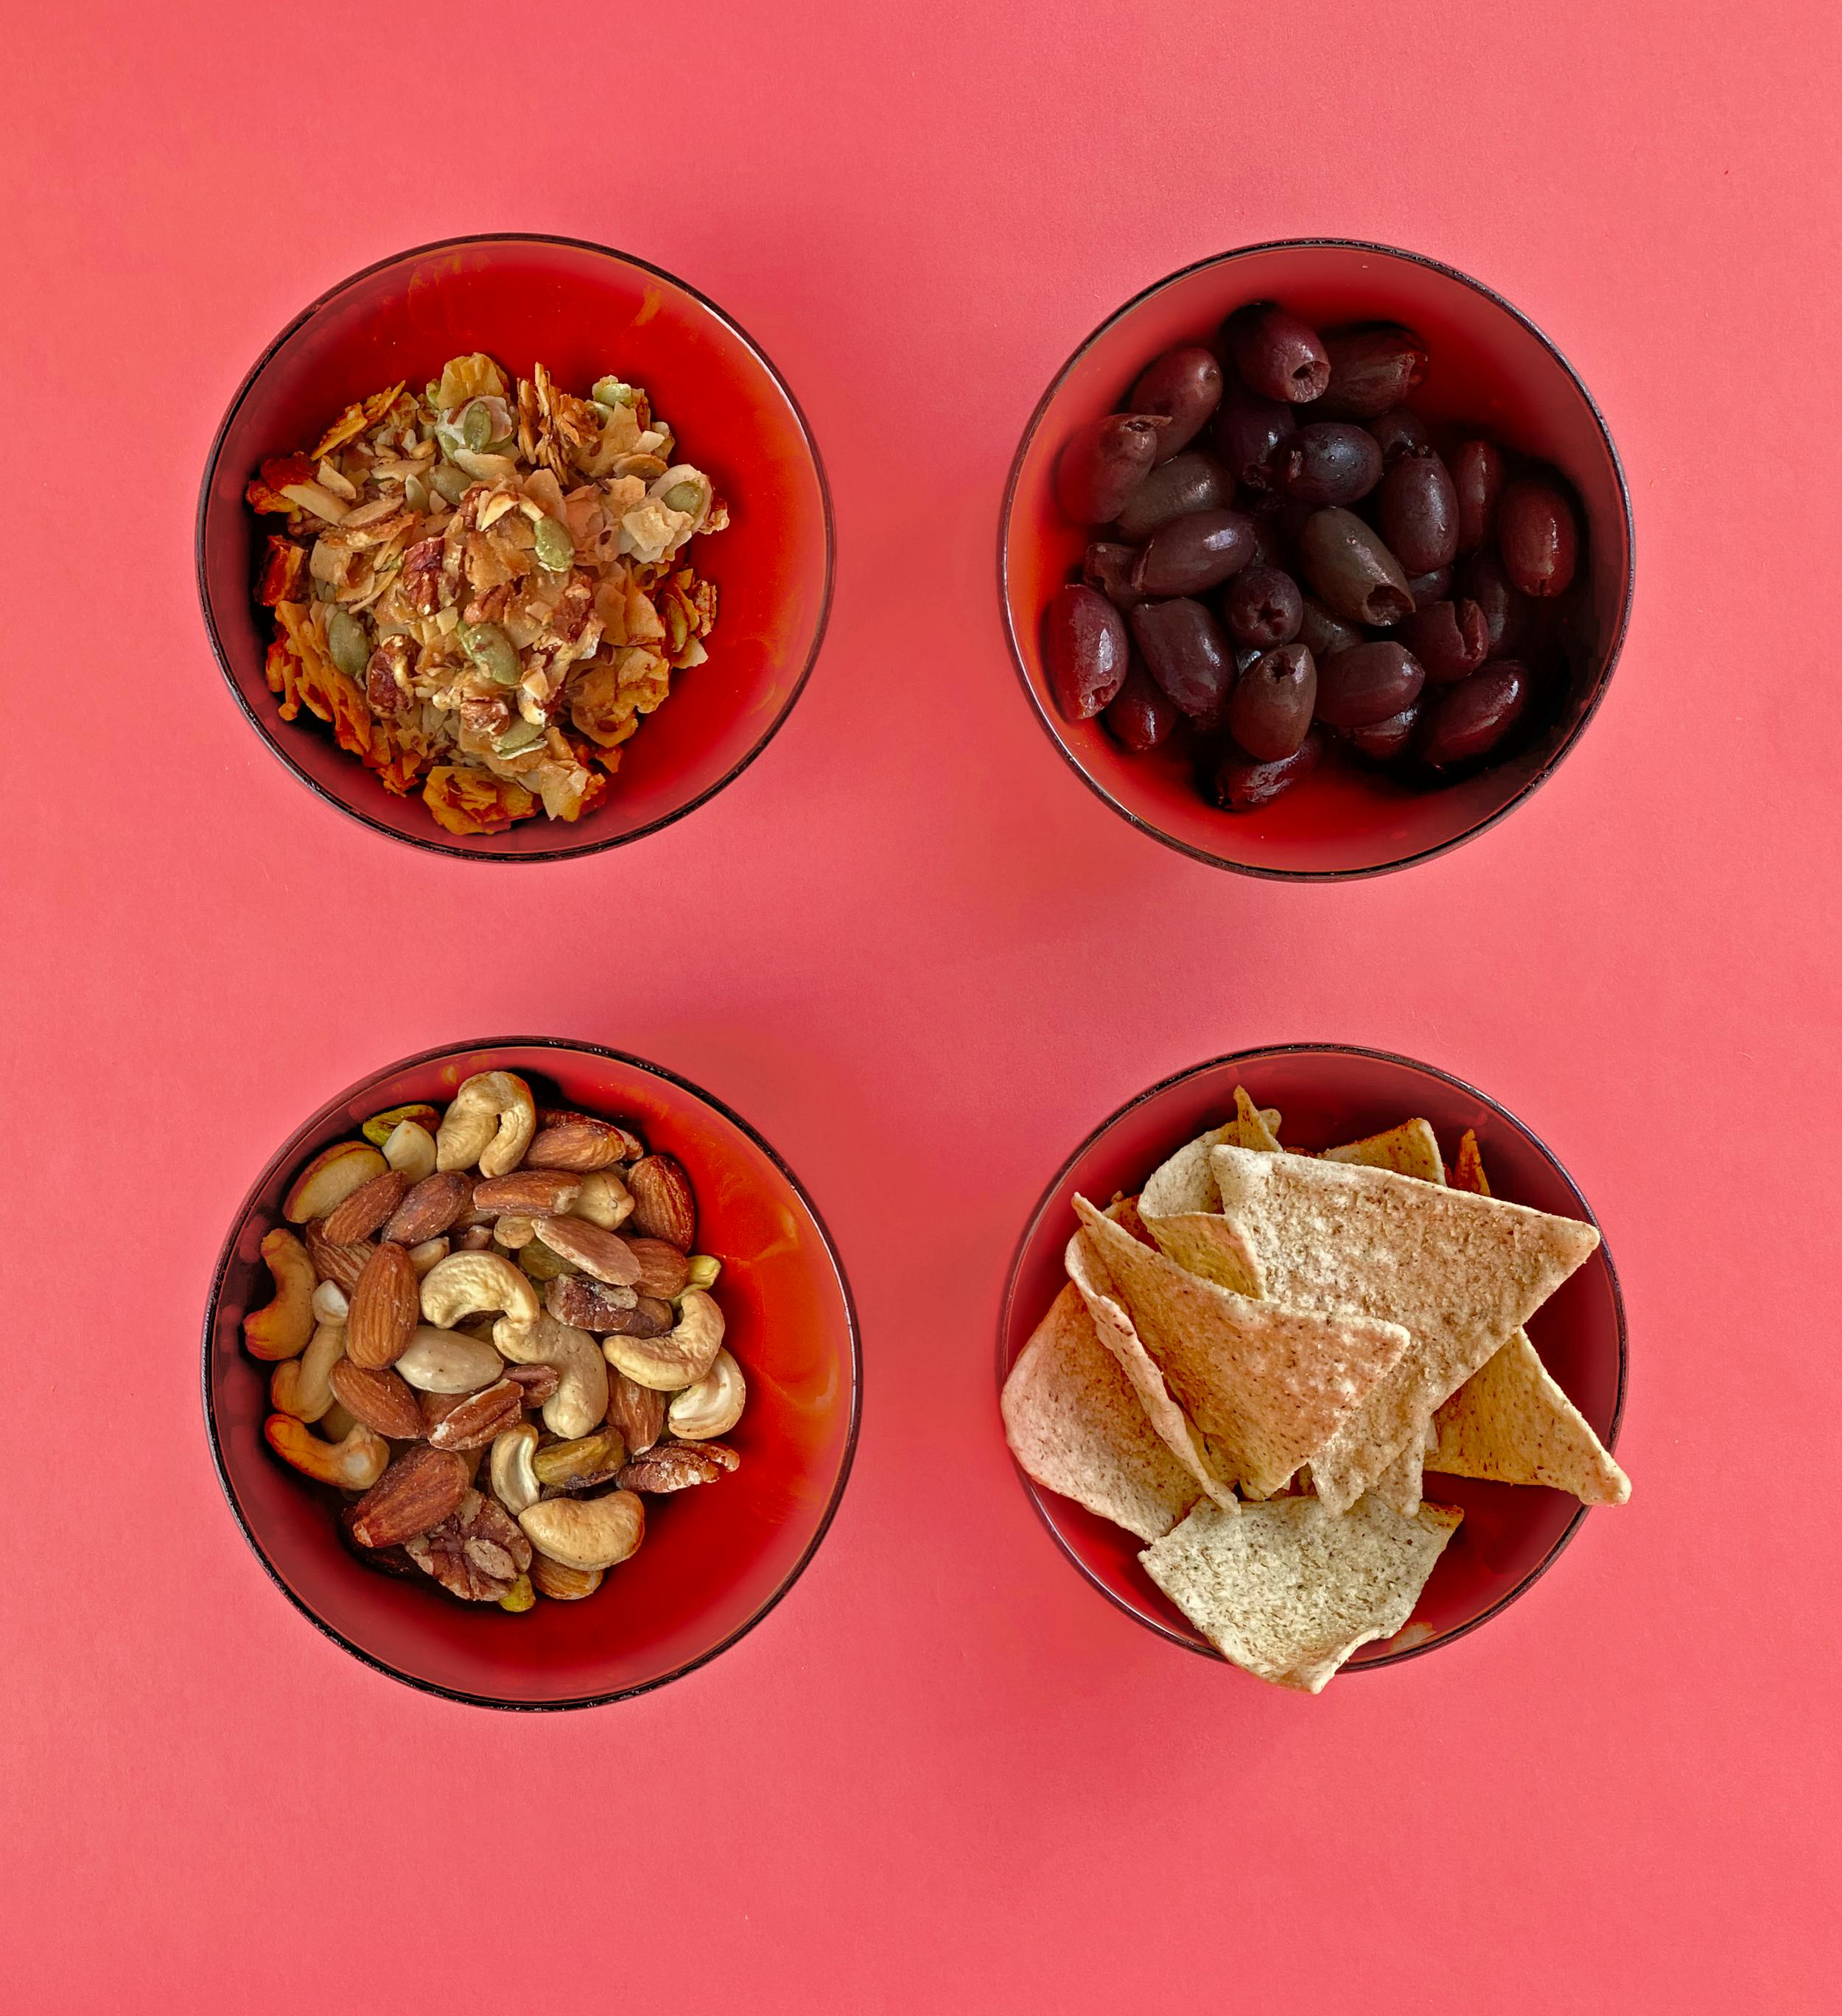 Bowls of Snacks on Red